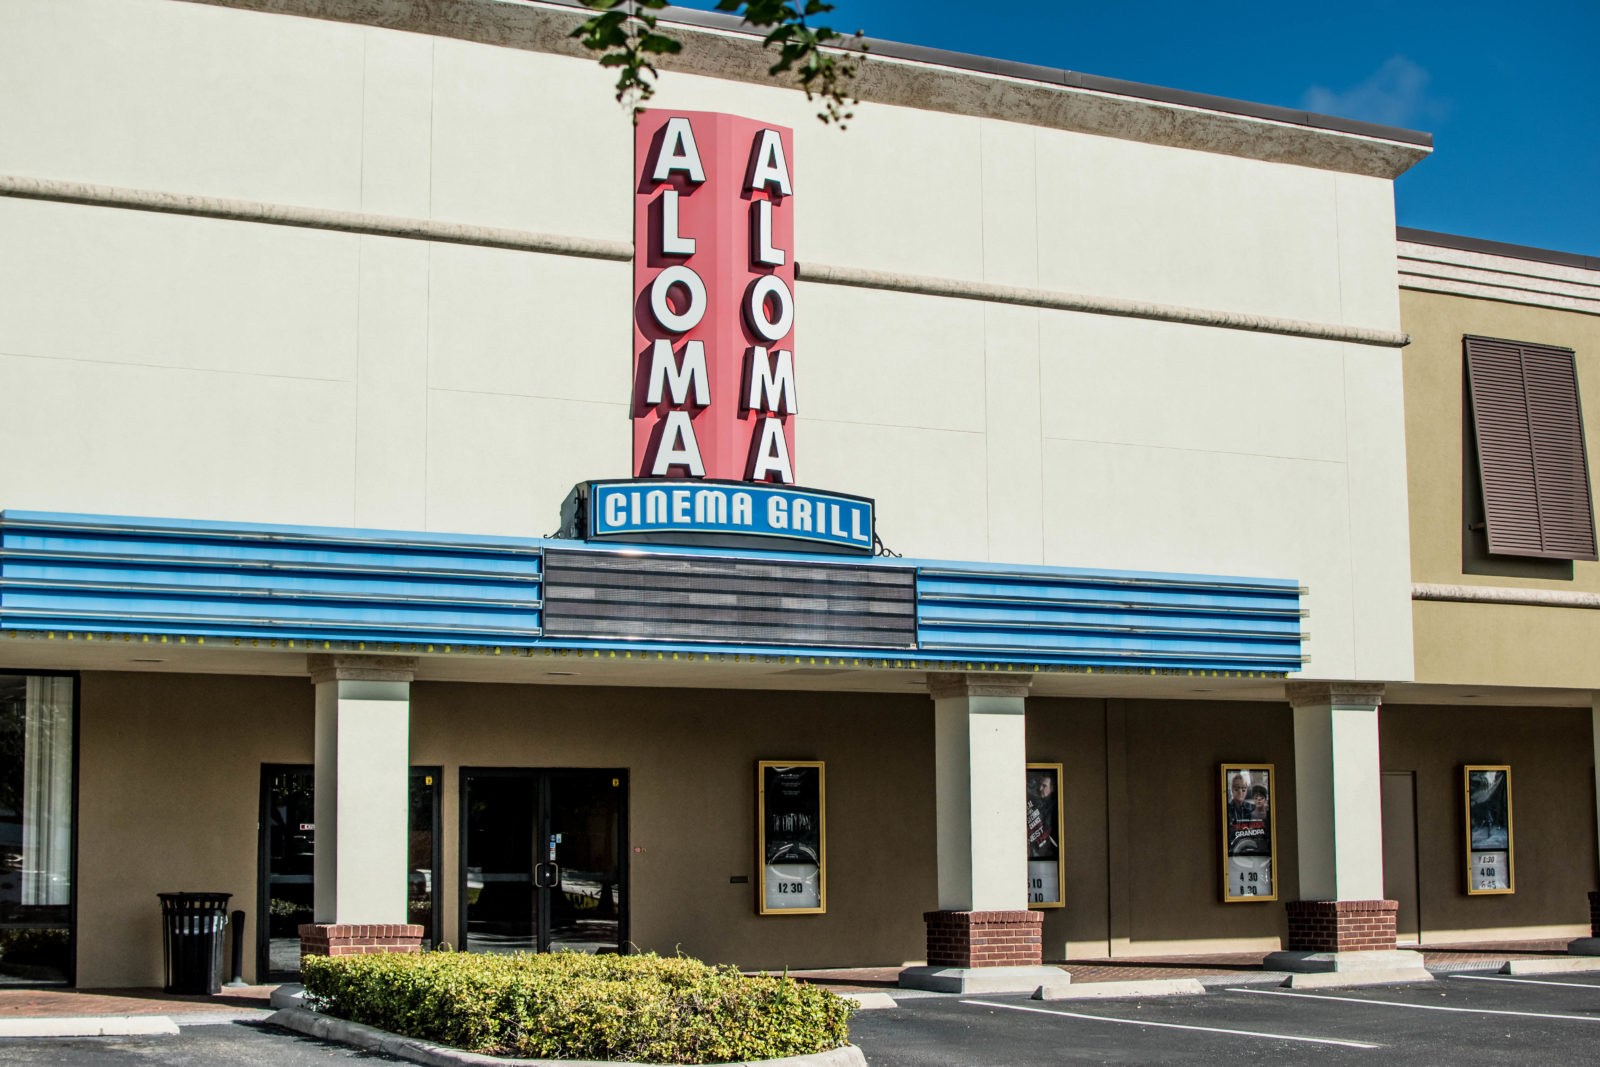 Exterior of Aloma Cinema Grill in Winter Park, Fla.